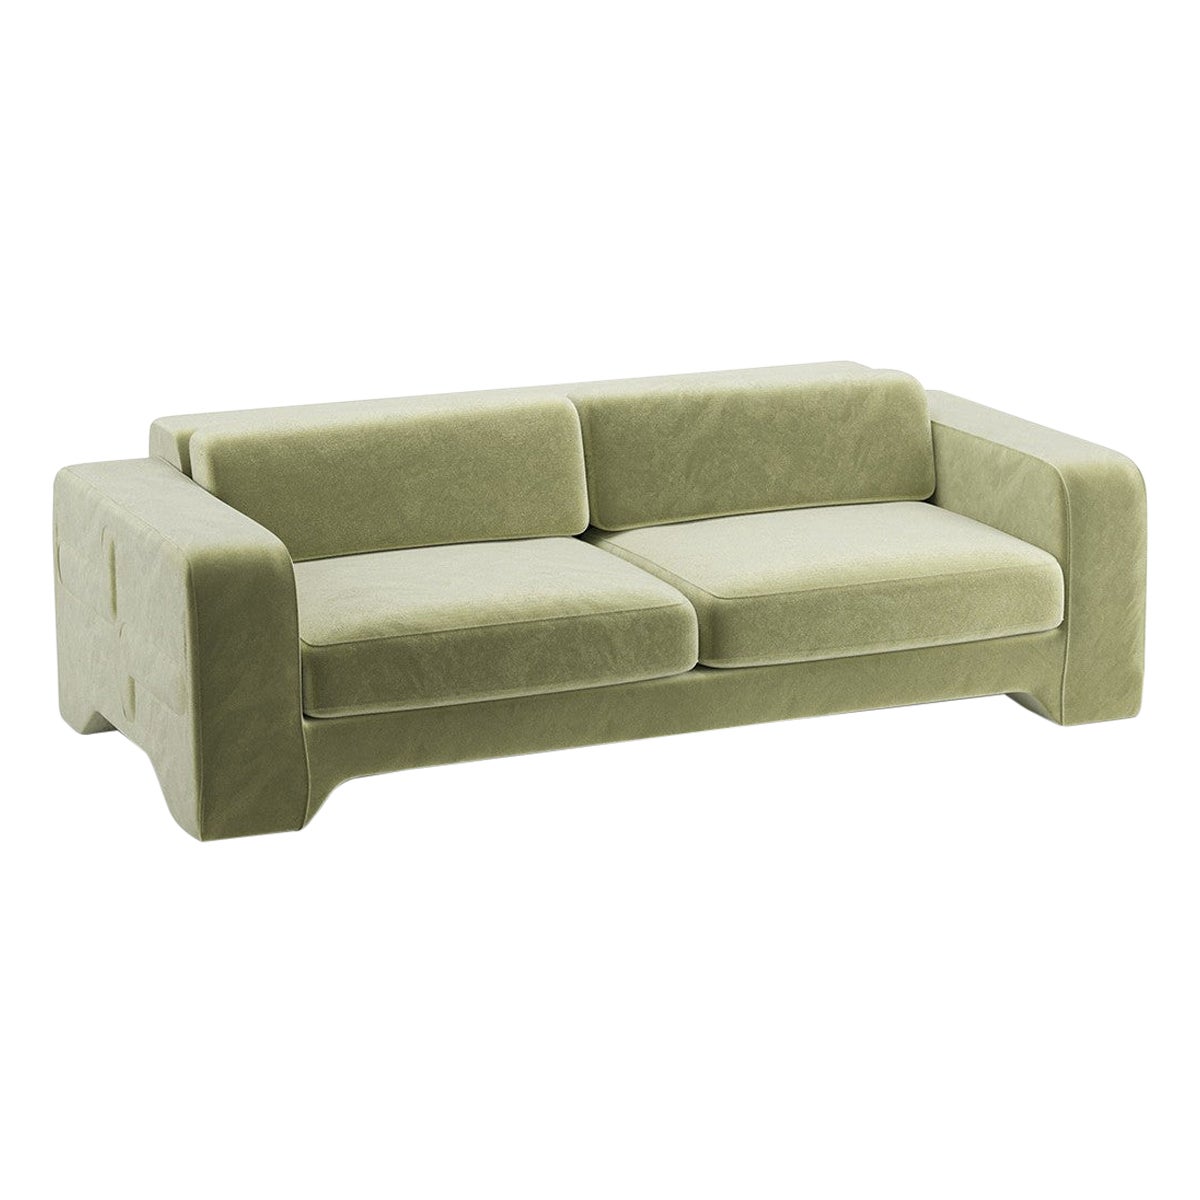 Popus Editions Giovanna 2.5 Seater Sofa in Almond Green Como Velvet Upholstery For Sale